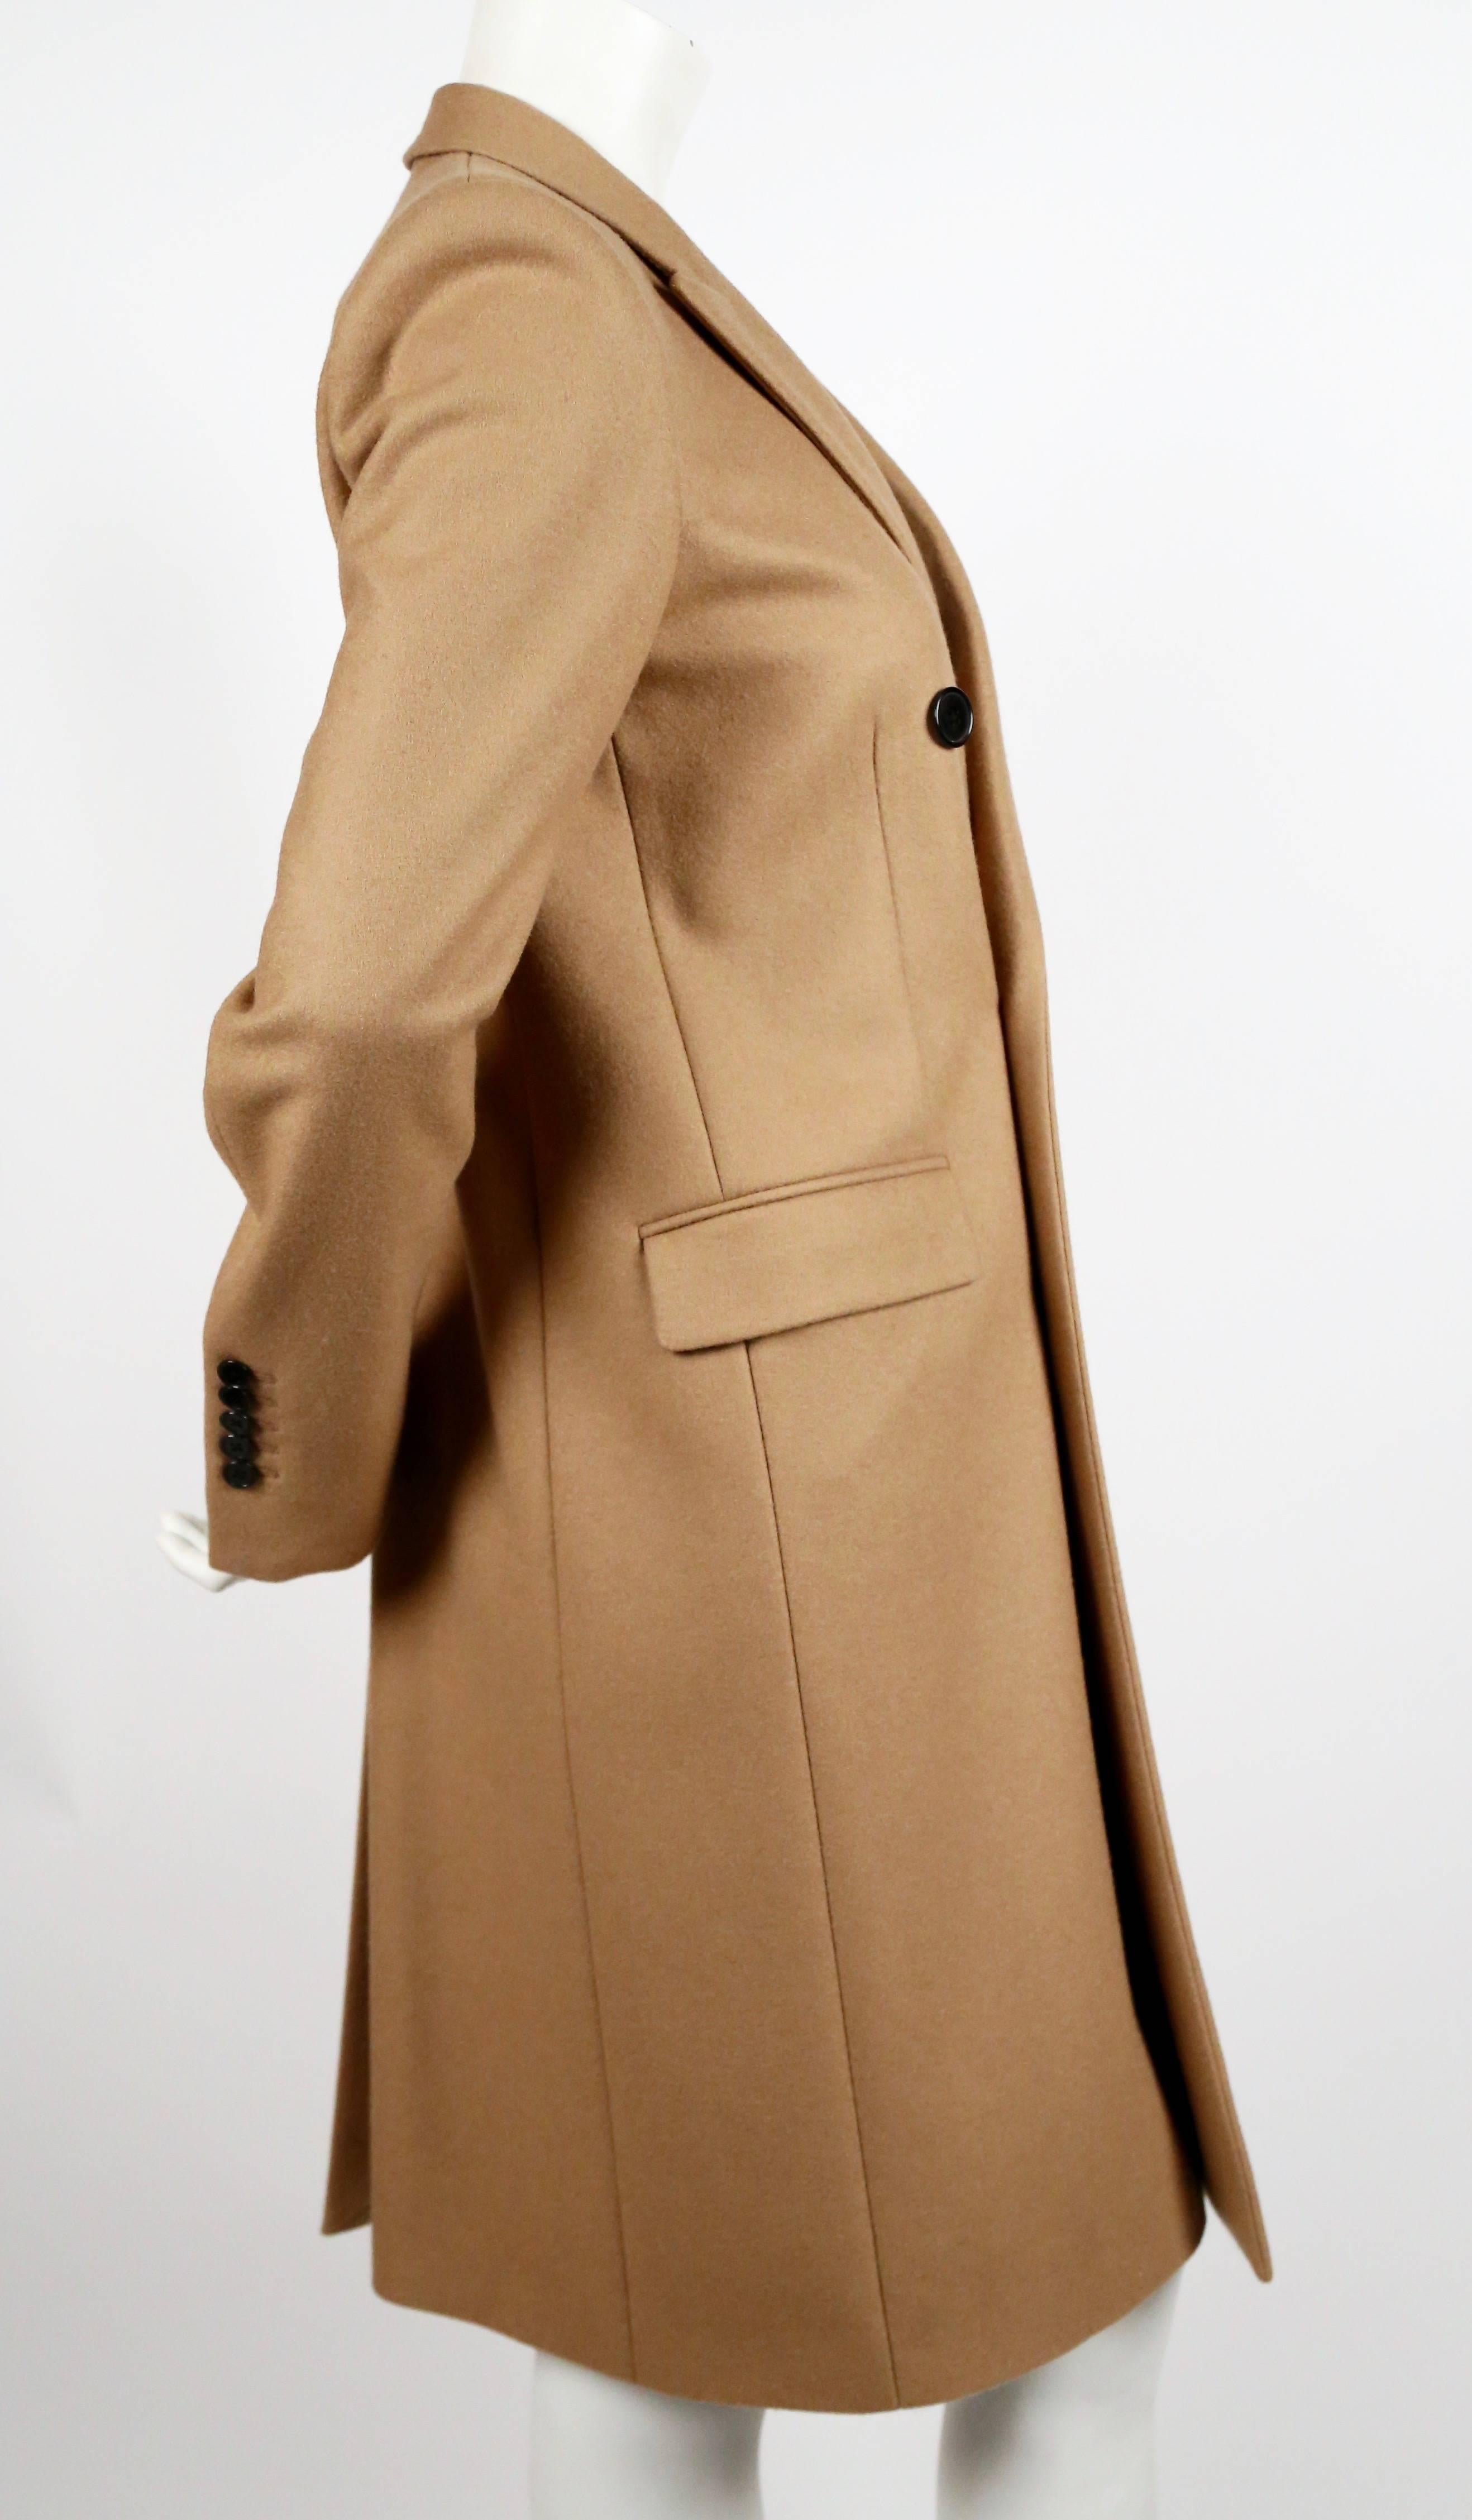 Camel double breasted wool coat from Saint Laurent designed by Hedi Slimane.
French size 38. Approximate measurement: shoulder along top 15.5